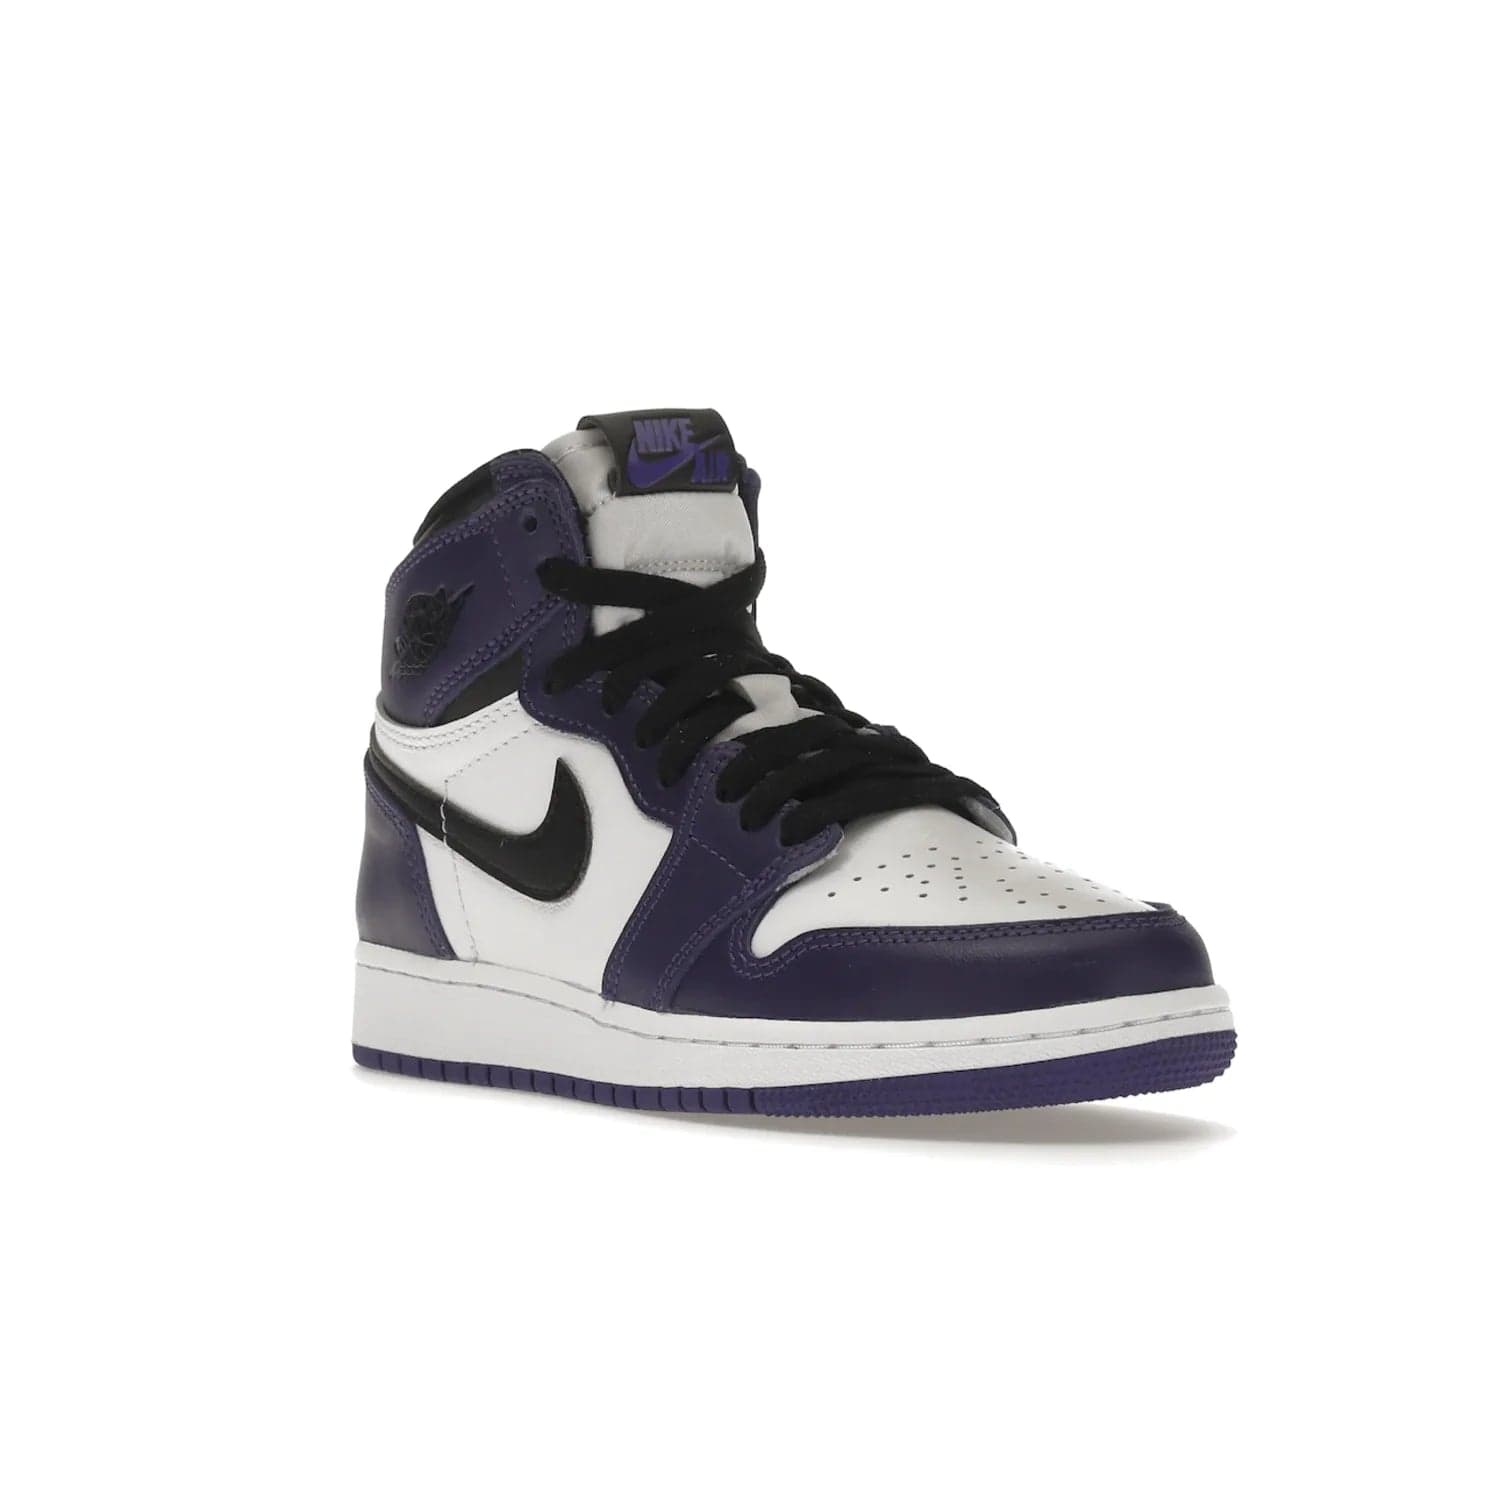 Jordan 1 Retro High Court Purple White (GS) - Image 6 - Only at www.BallersClubKickz.com - The Air Jordan 1 Retro High Court Purple is here and young sneaker heads can show off classic style. Features a white tumbled leather upper, black swoosh, purple overlays, black collar with purple overlay, white tongue, black patch with purple Nike Air logo and swoosh, white midsole, and purple rubber outsole with circular pattern.